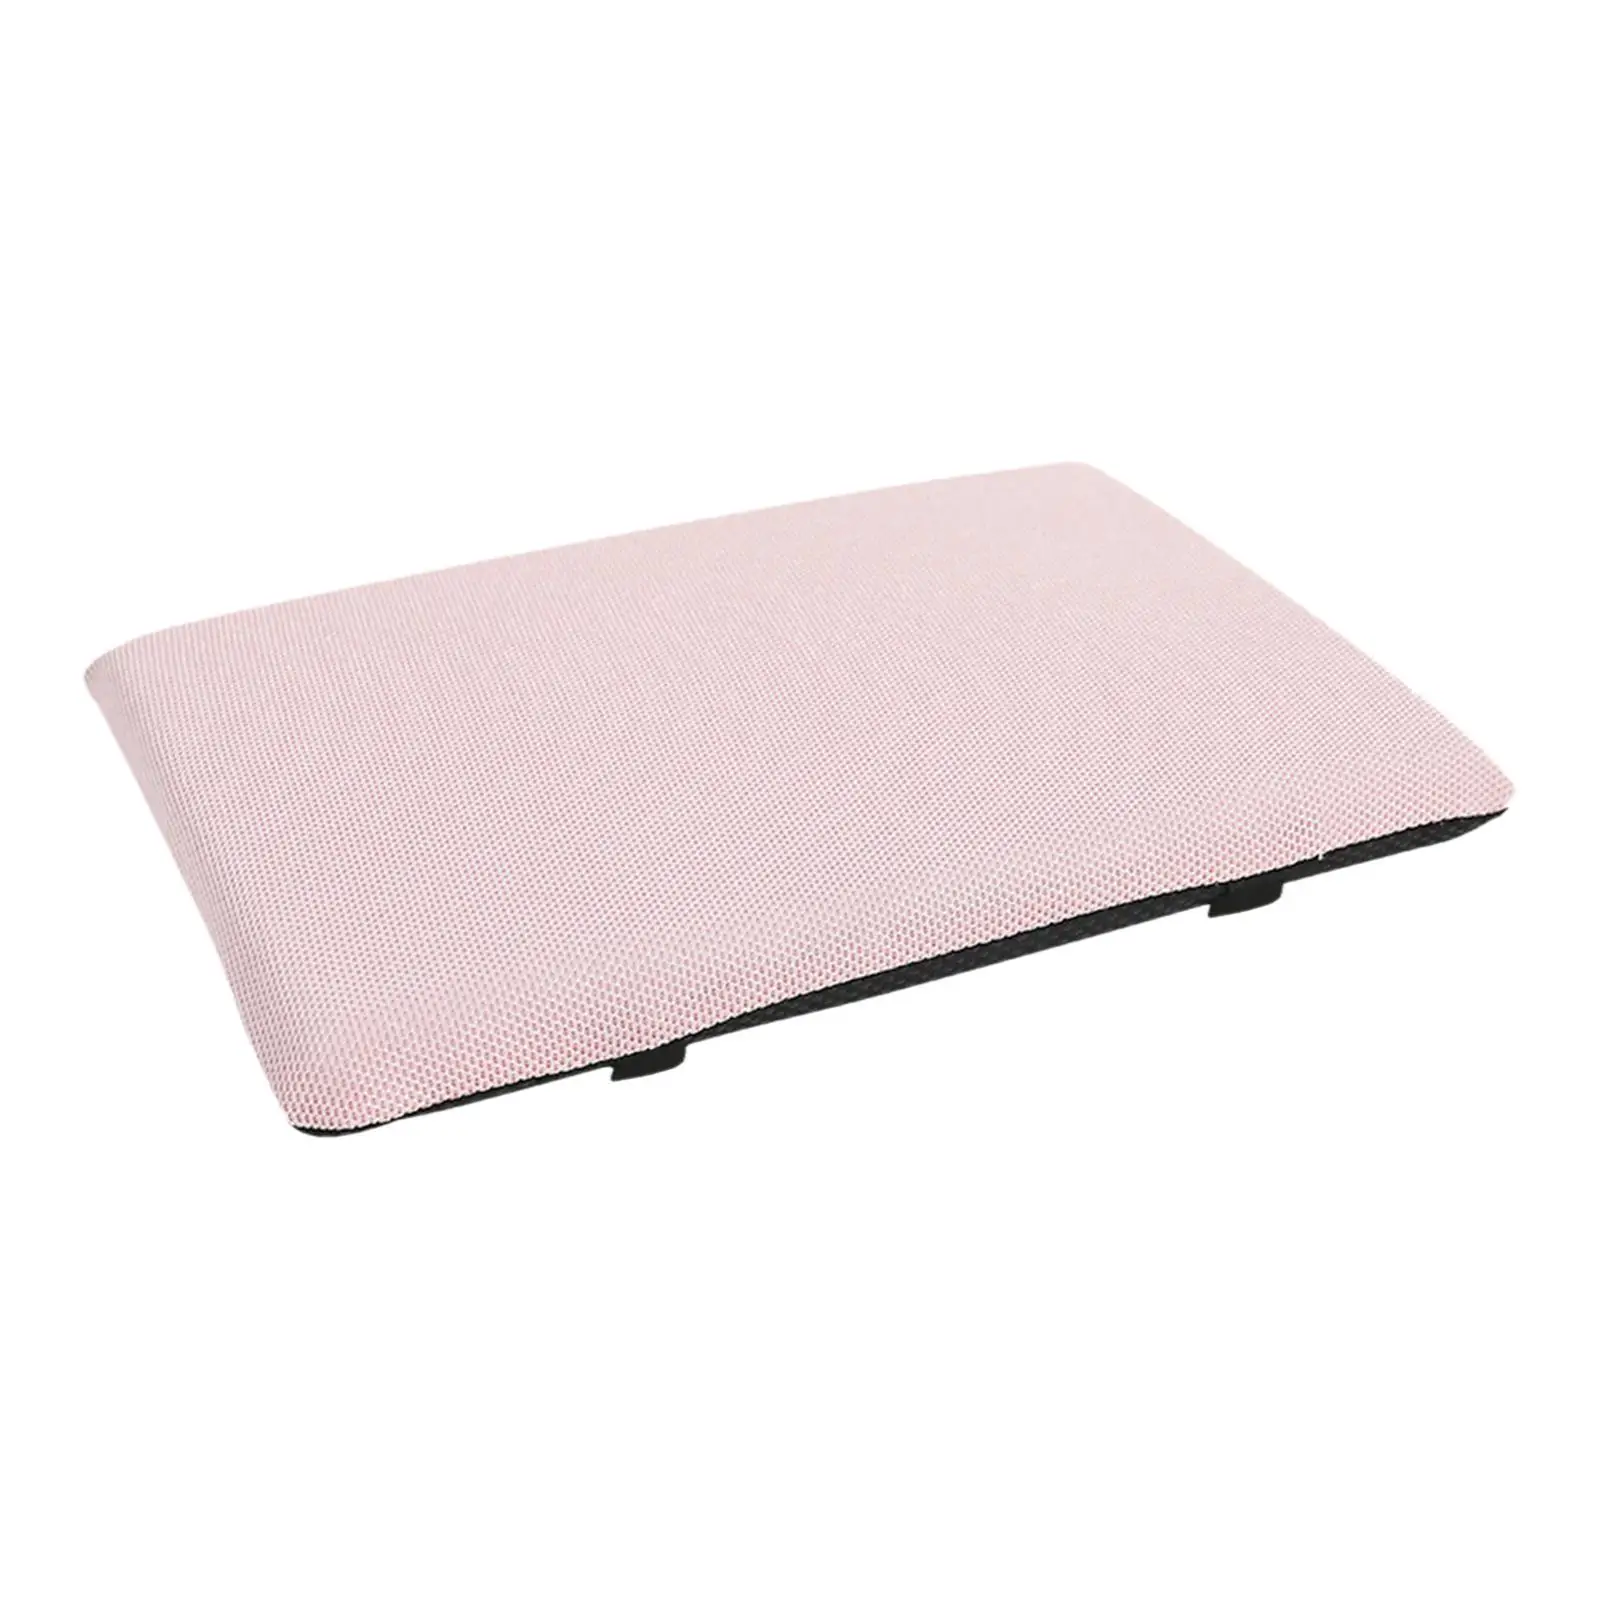 Chair Cushion Comfortable Memory Foam Breathable Decoration Seat Cushions for Living Room Kids Reading Office Classroom